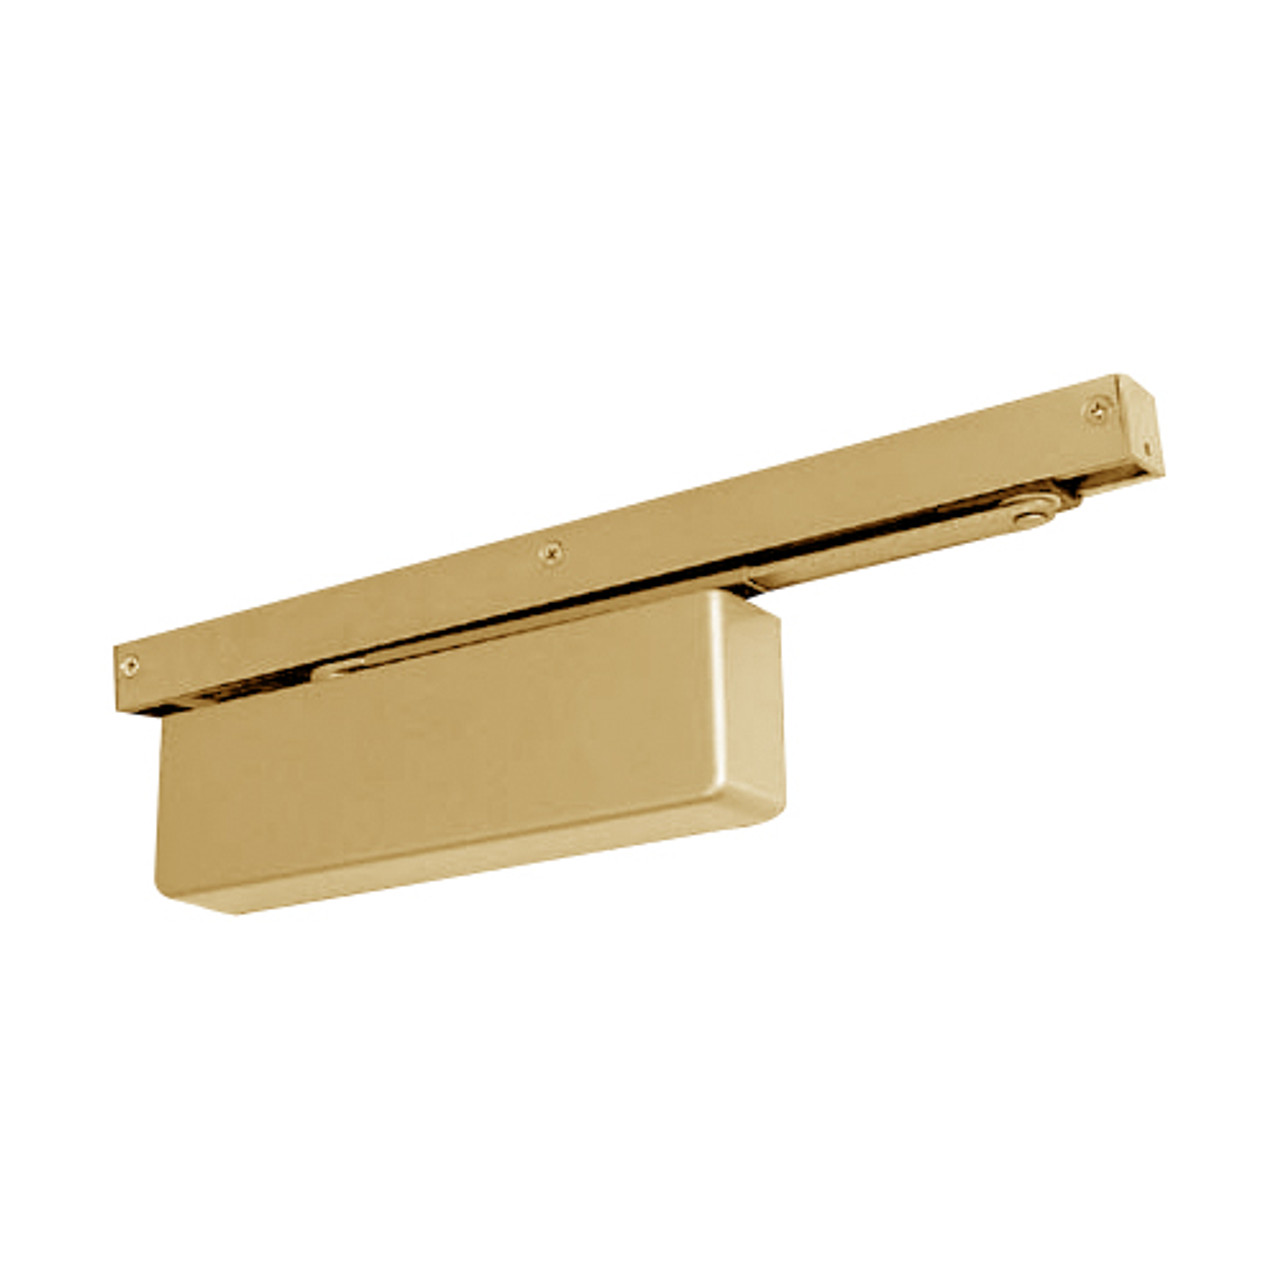 4400ST-696 Yale 4400 Series Institutional Door Closer with Pull Side Slide Track Arm in Satin Brass